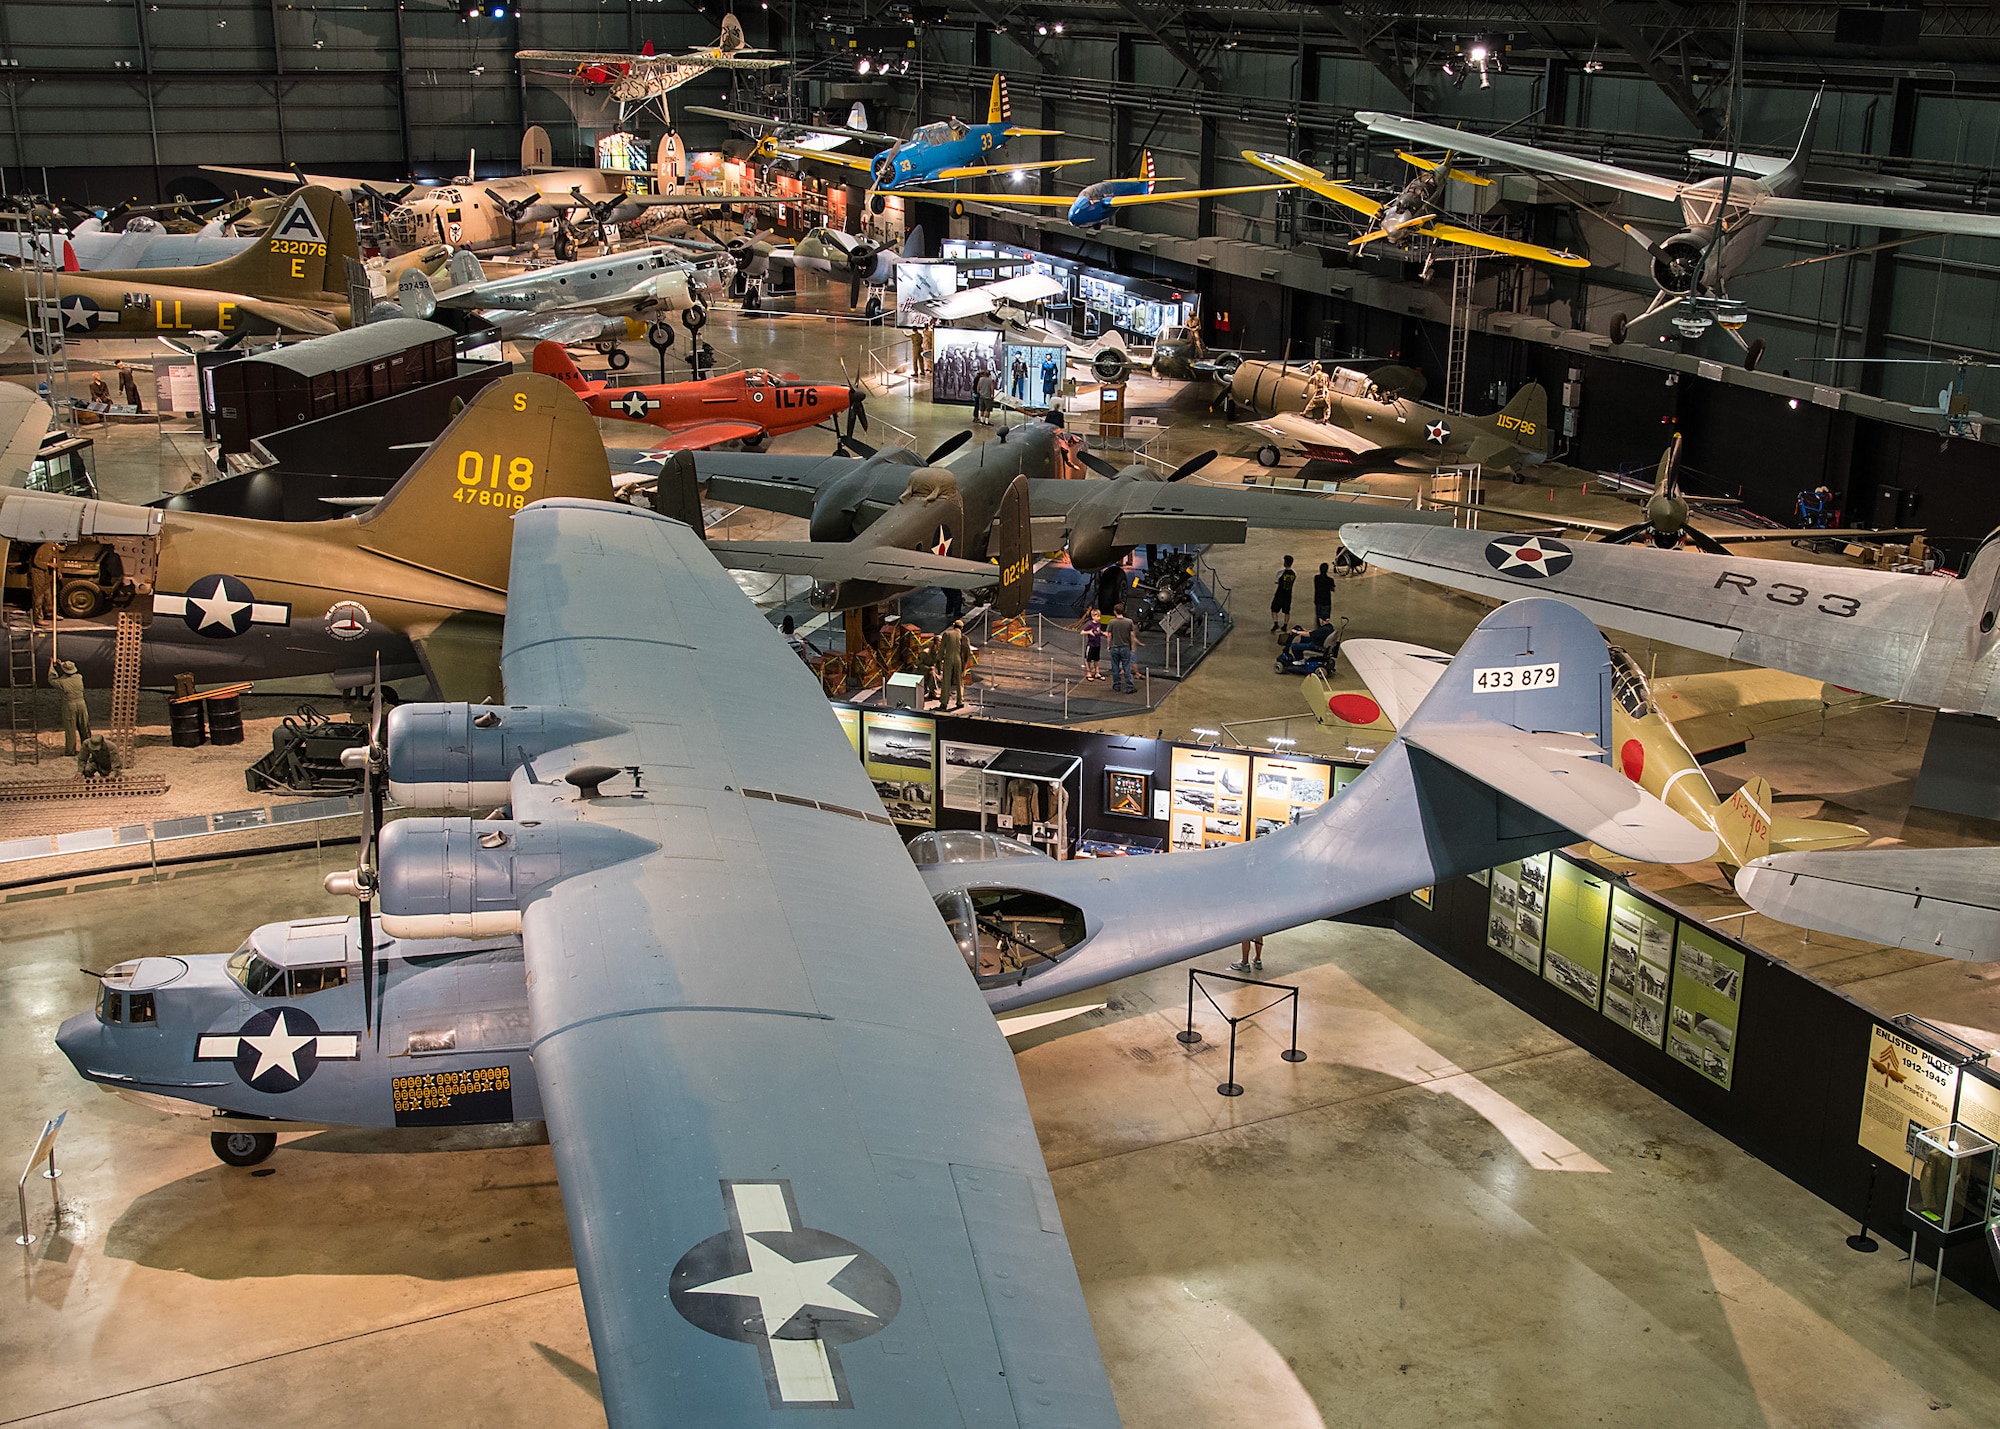 Consolidated OA-10 Catalina and other aircraft in the WWII Gallery at the National Museum of the United States Air Force. (U.S. Air Force photo by Ken LaRock)